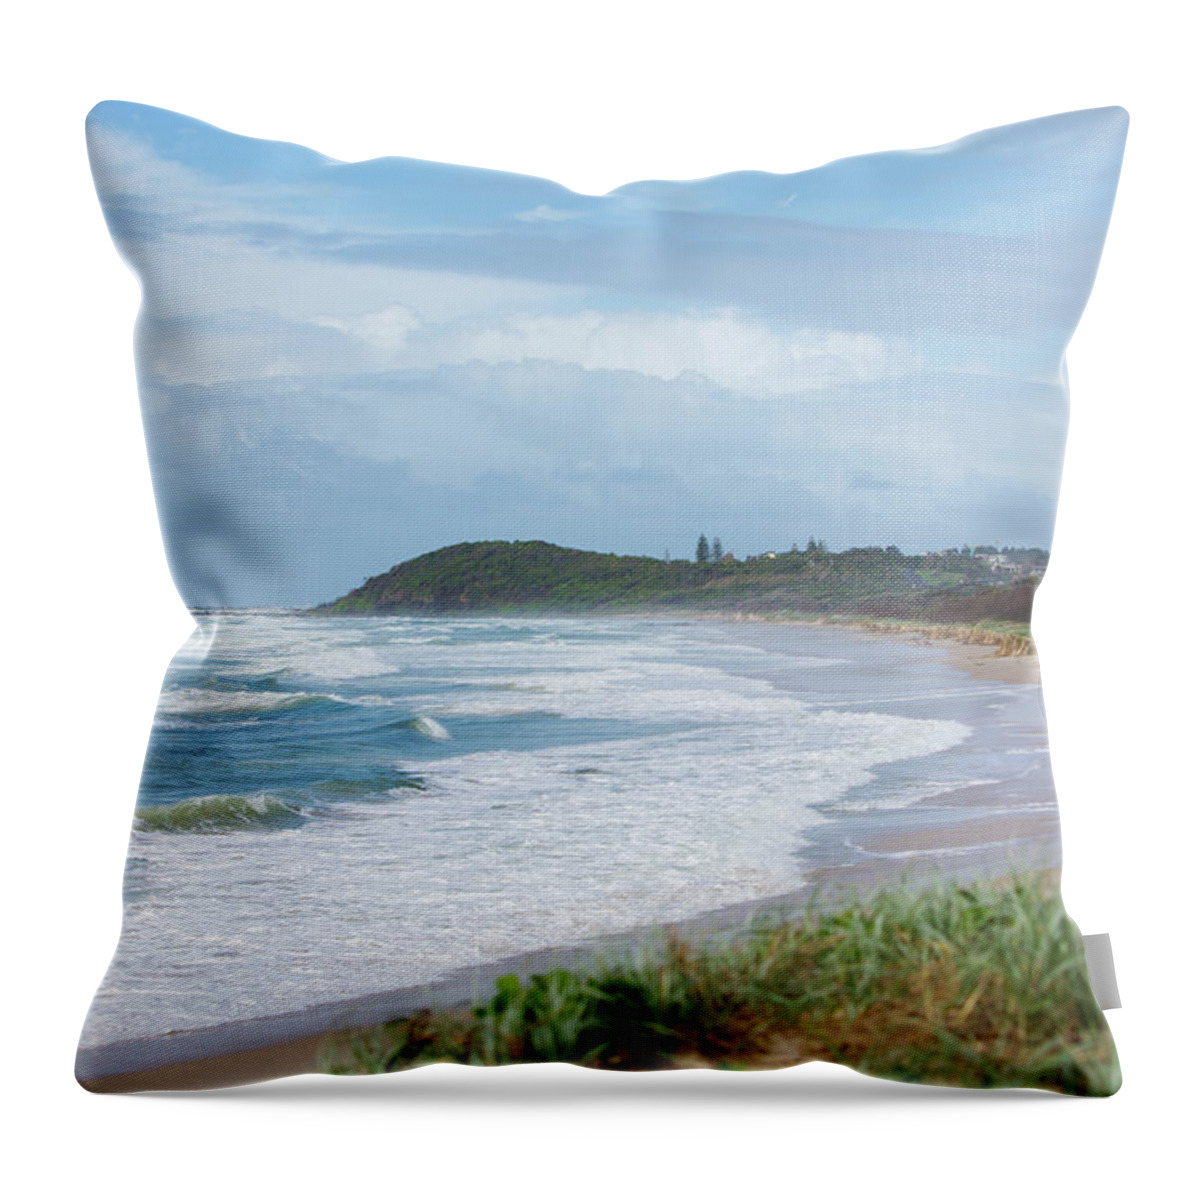 Water's Edge Throw Pillow featuring the photograph Storm Swell Waves On A Beach #1 by David Freund